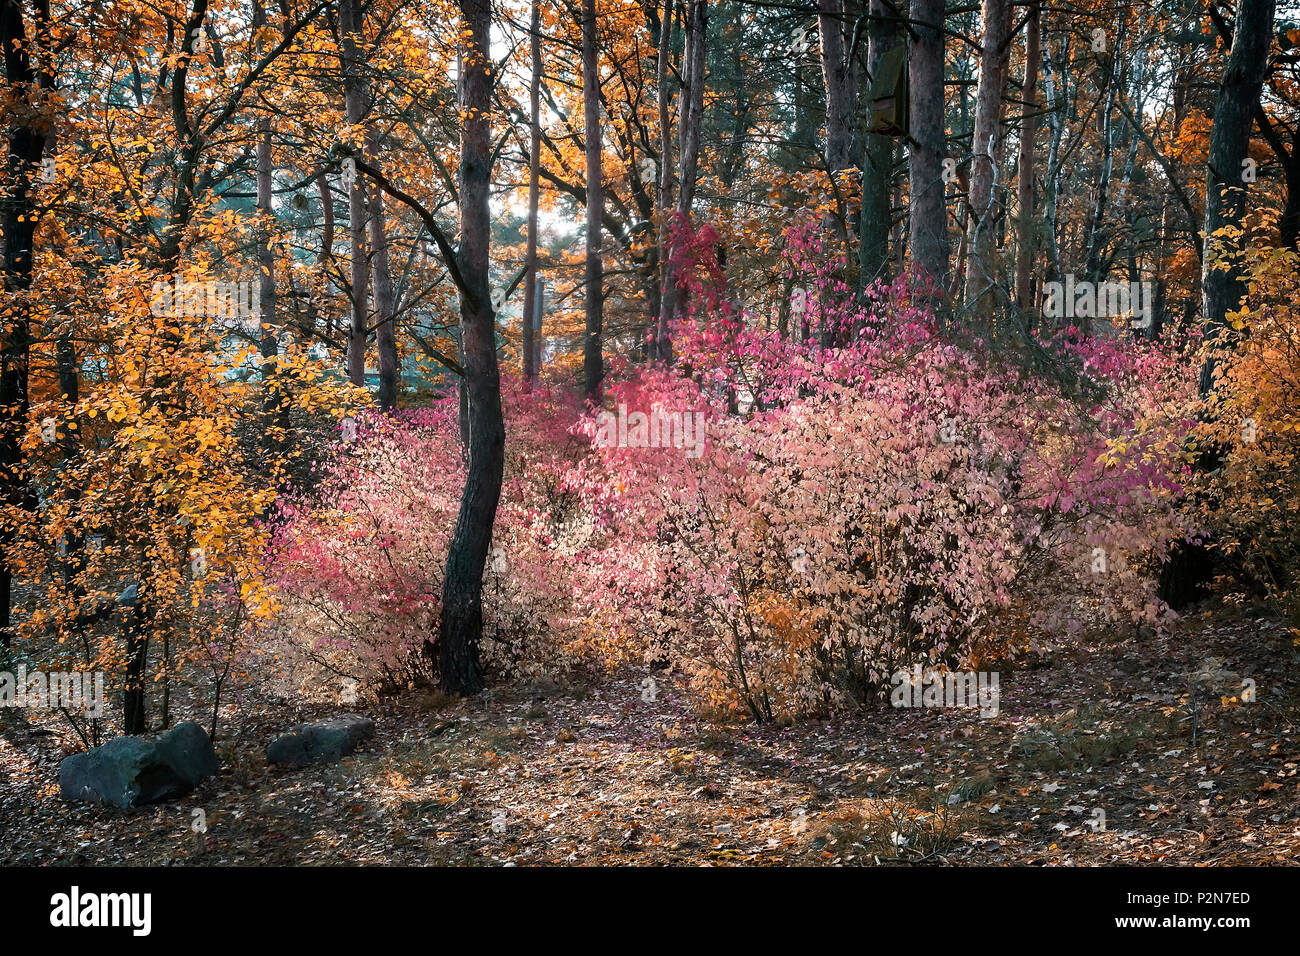 Autumn landscape: large shrub of the spindle tree with bright pink leaves in the autumn forest. Stock Photo